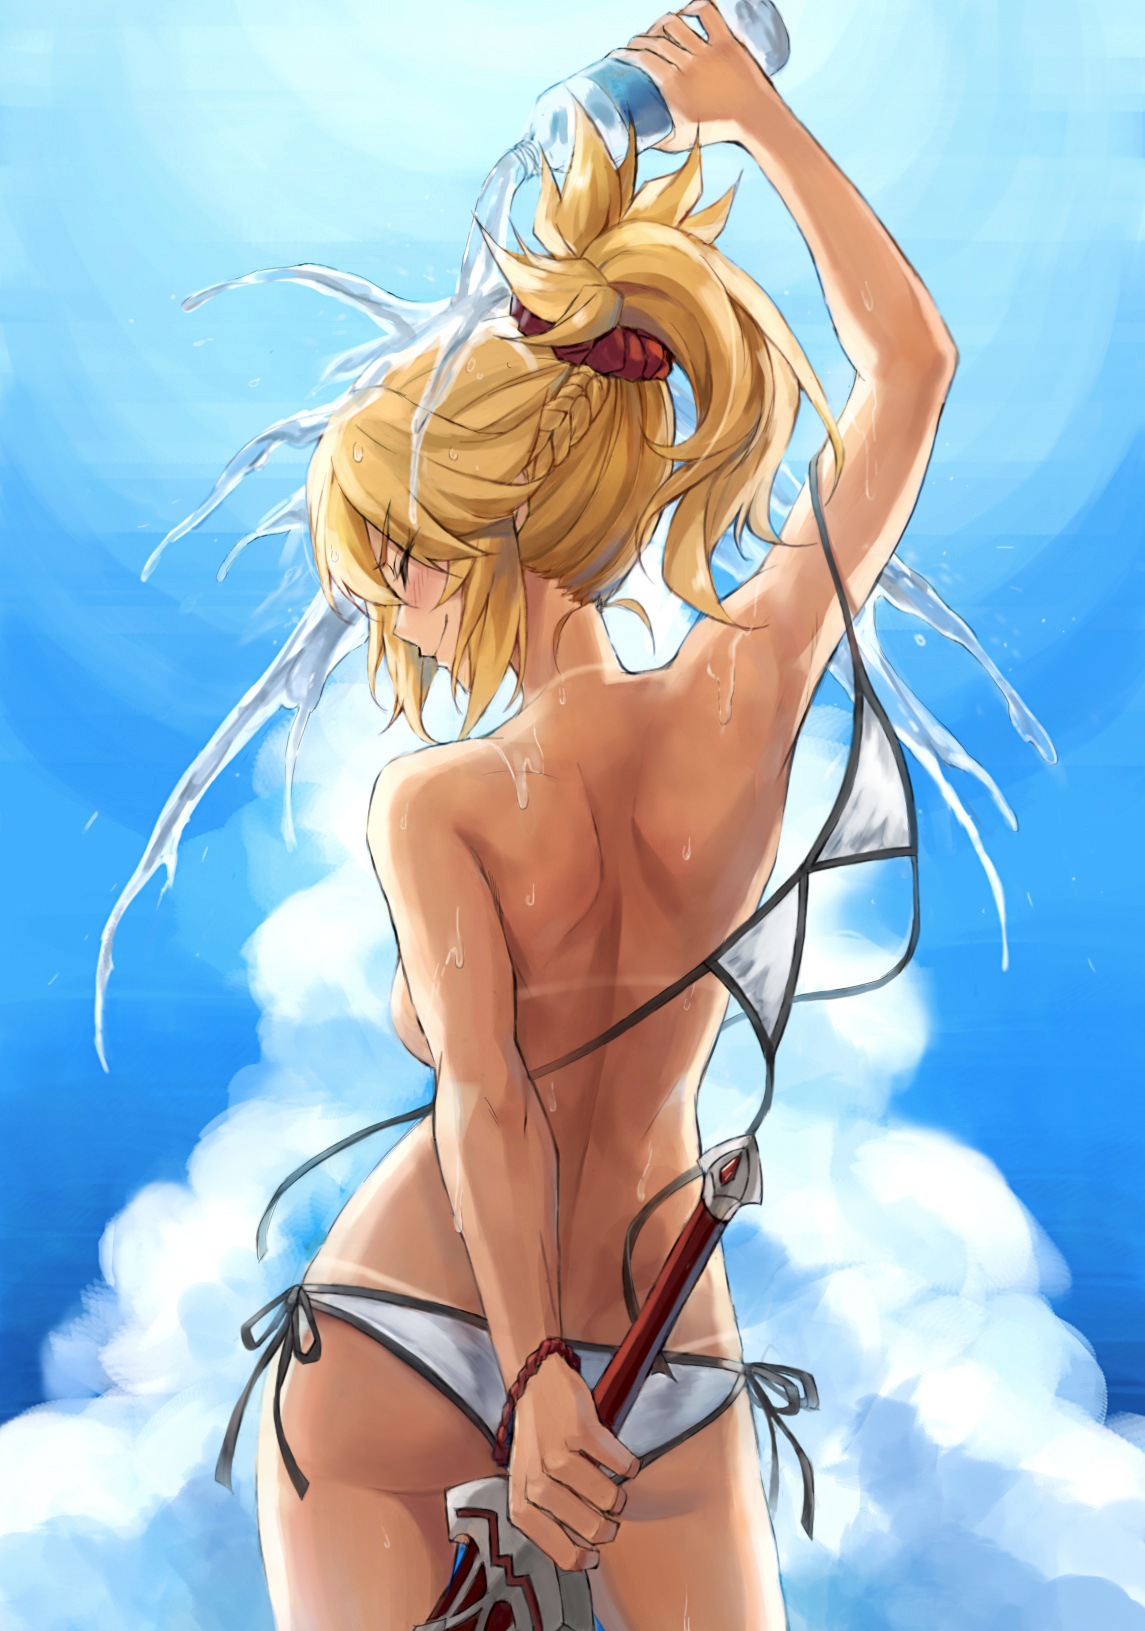 Anime 1145x1631 anime anime girls digital art artwork portrait display 2D Fate series Mordred (Fate/Apocrypha) sideboob white bikini women with swords tan lines bareback thighs the gap wet body long hair braids blushing summer clouds closed eyes ecchi Fate/Apocrypha  hair in face fan art ass ponytail blonde topless Tonee